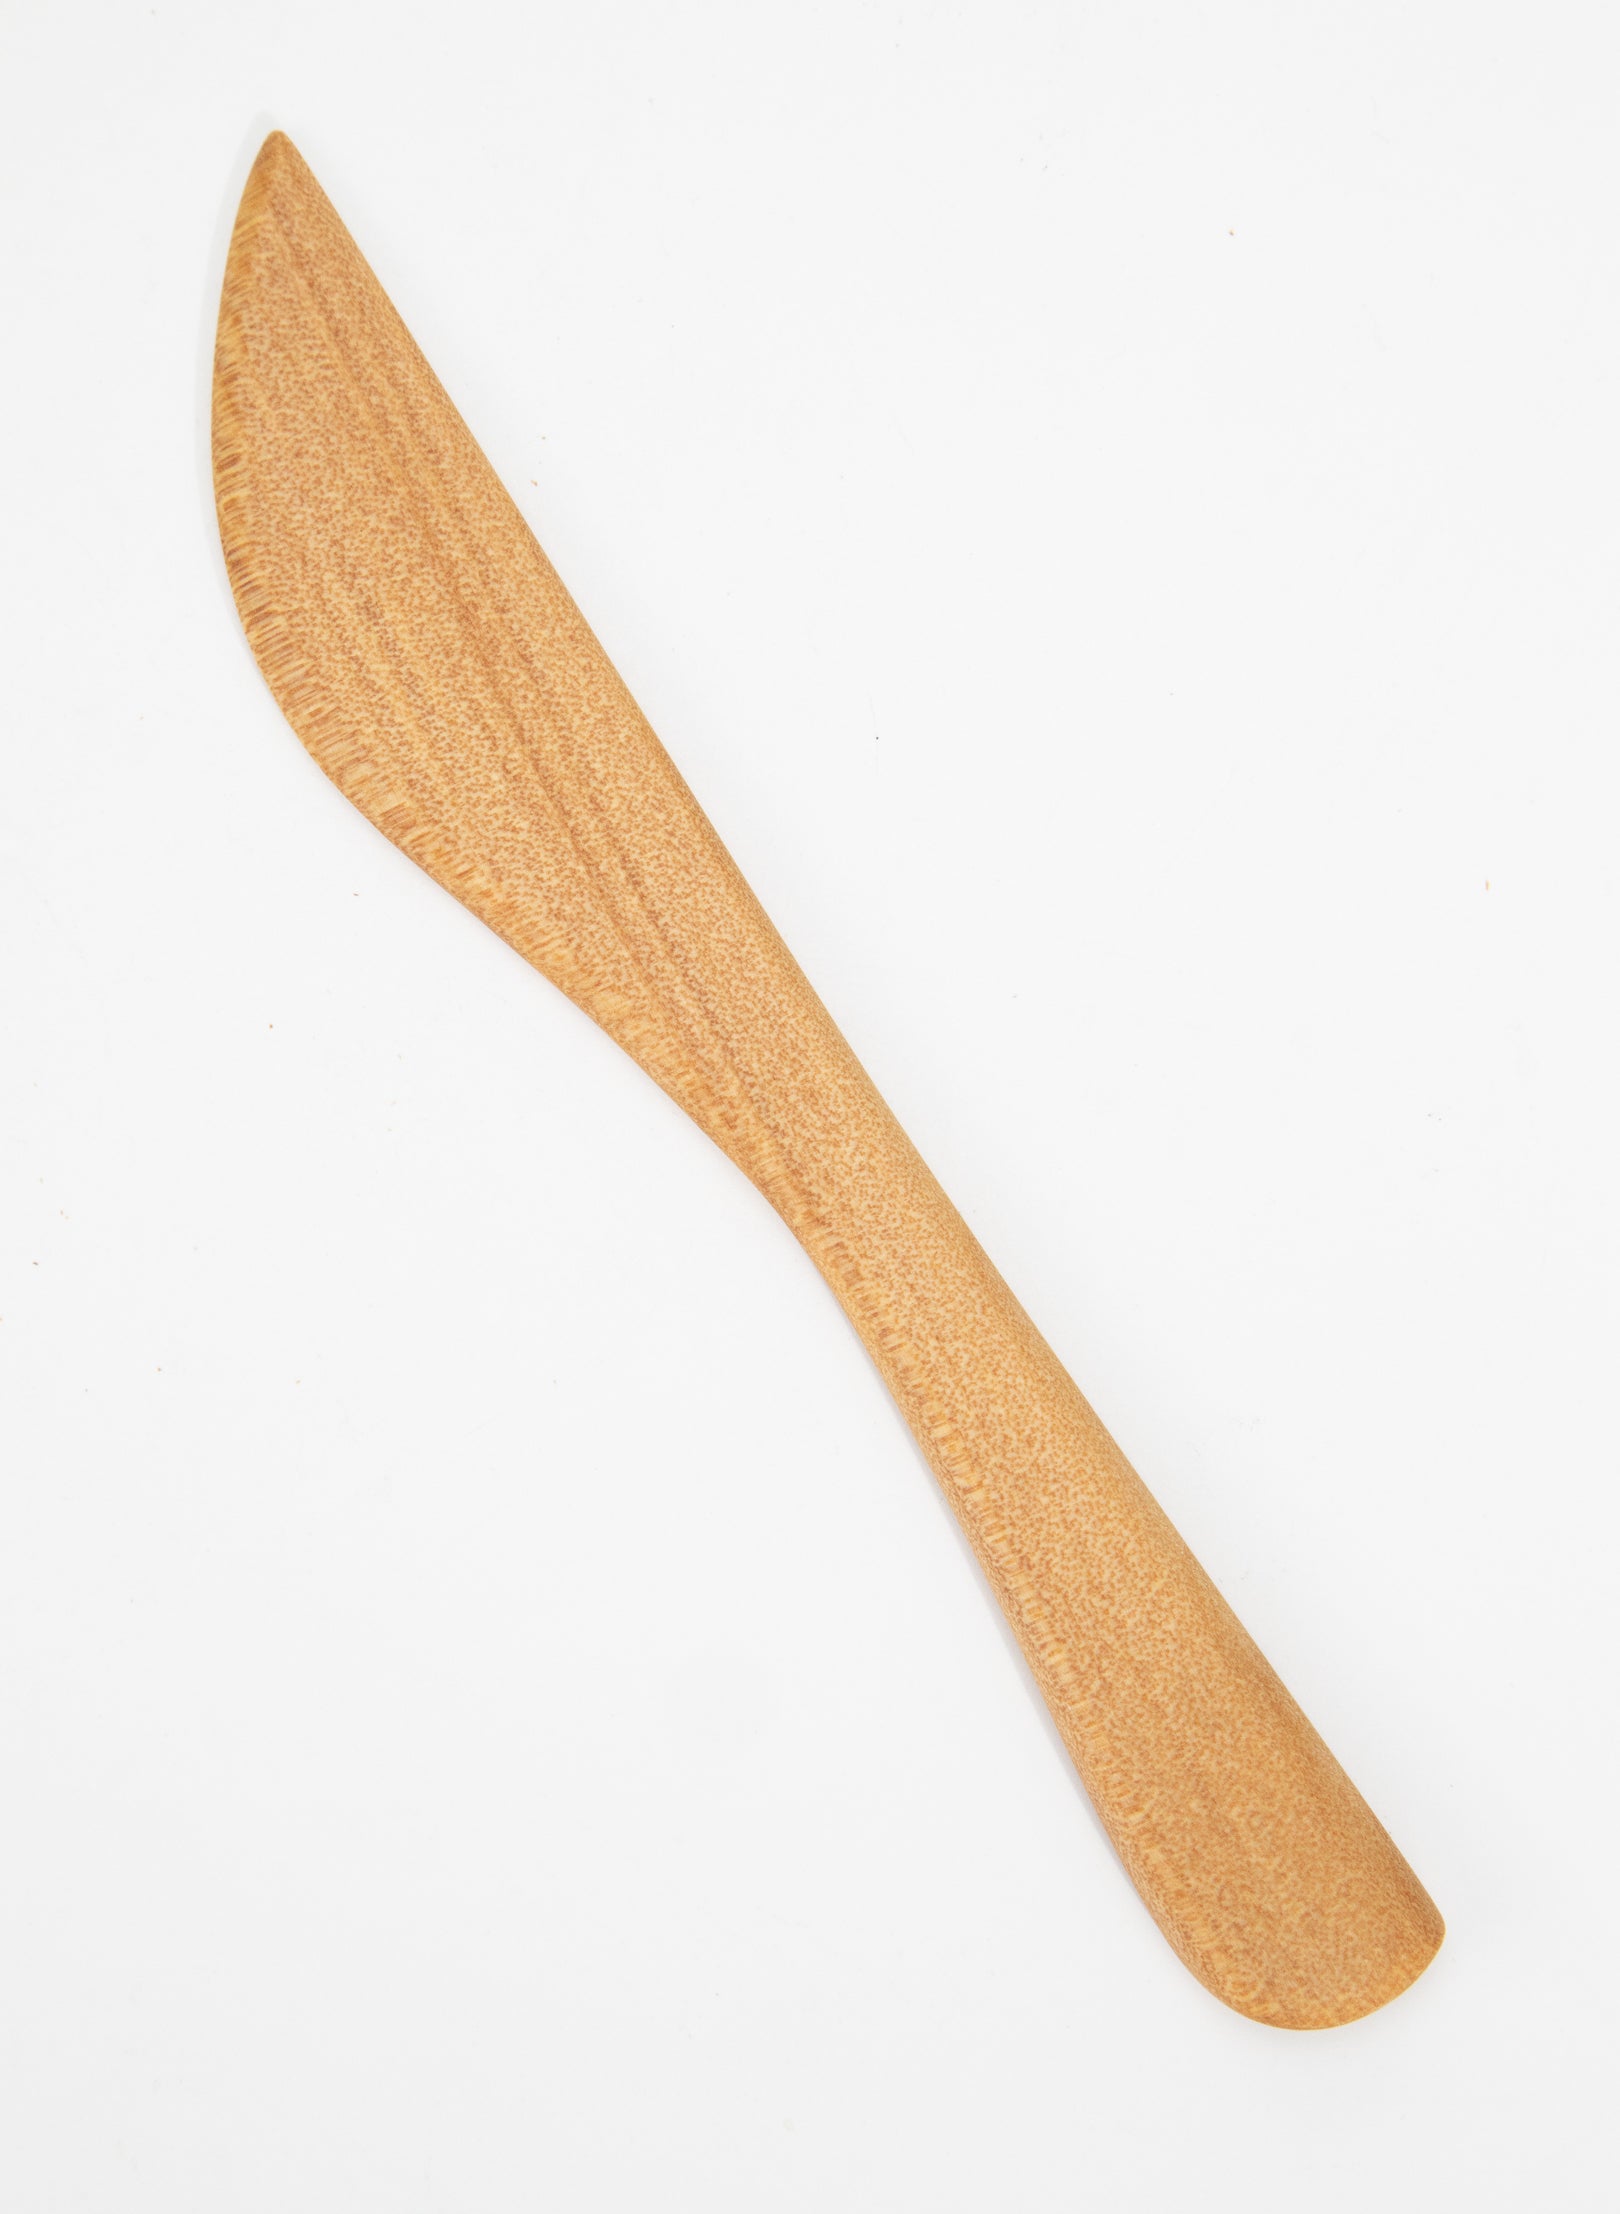 Kauri Board With Knife - Small